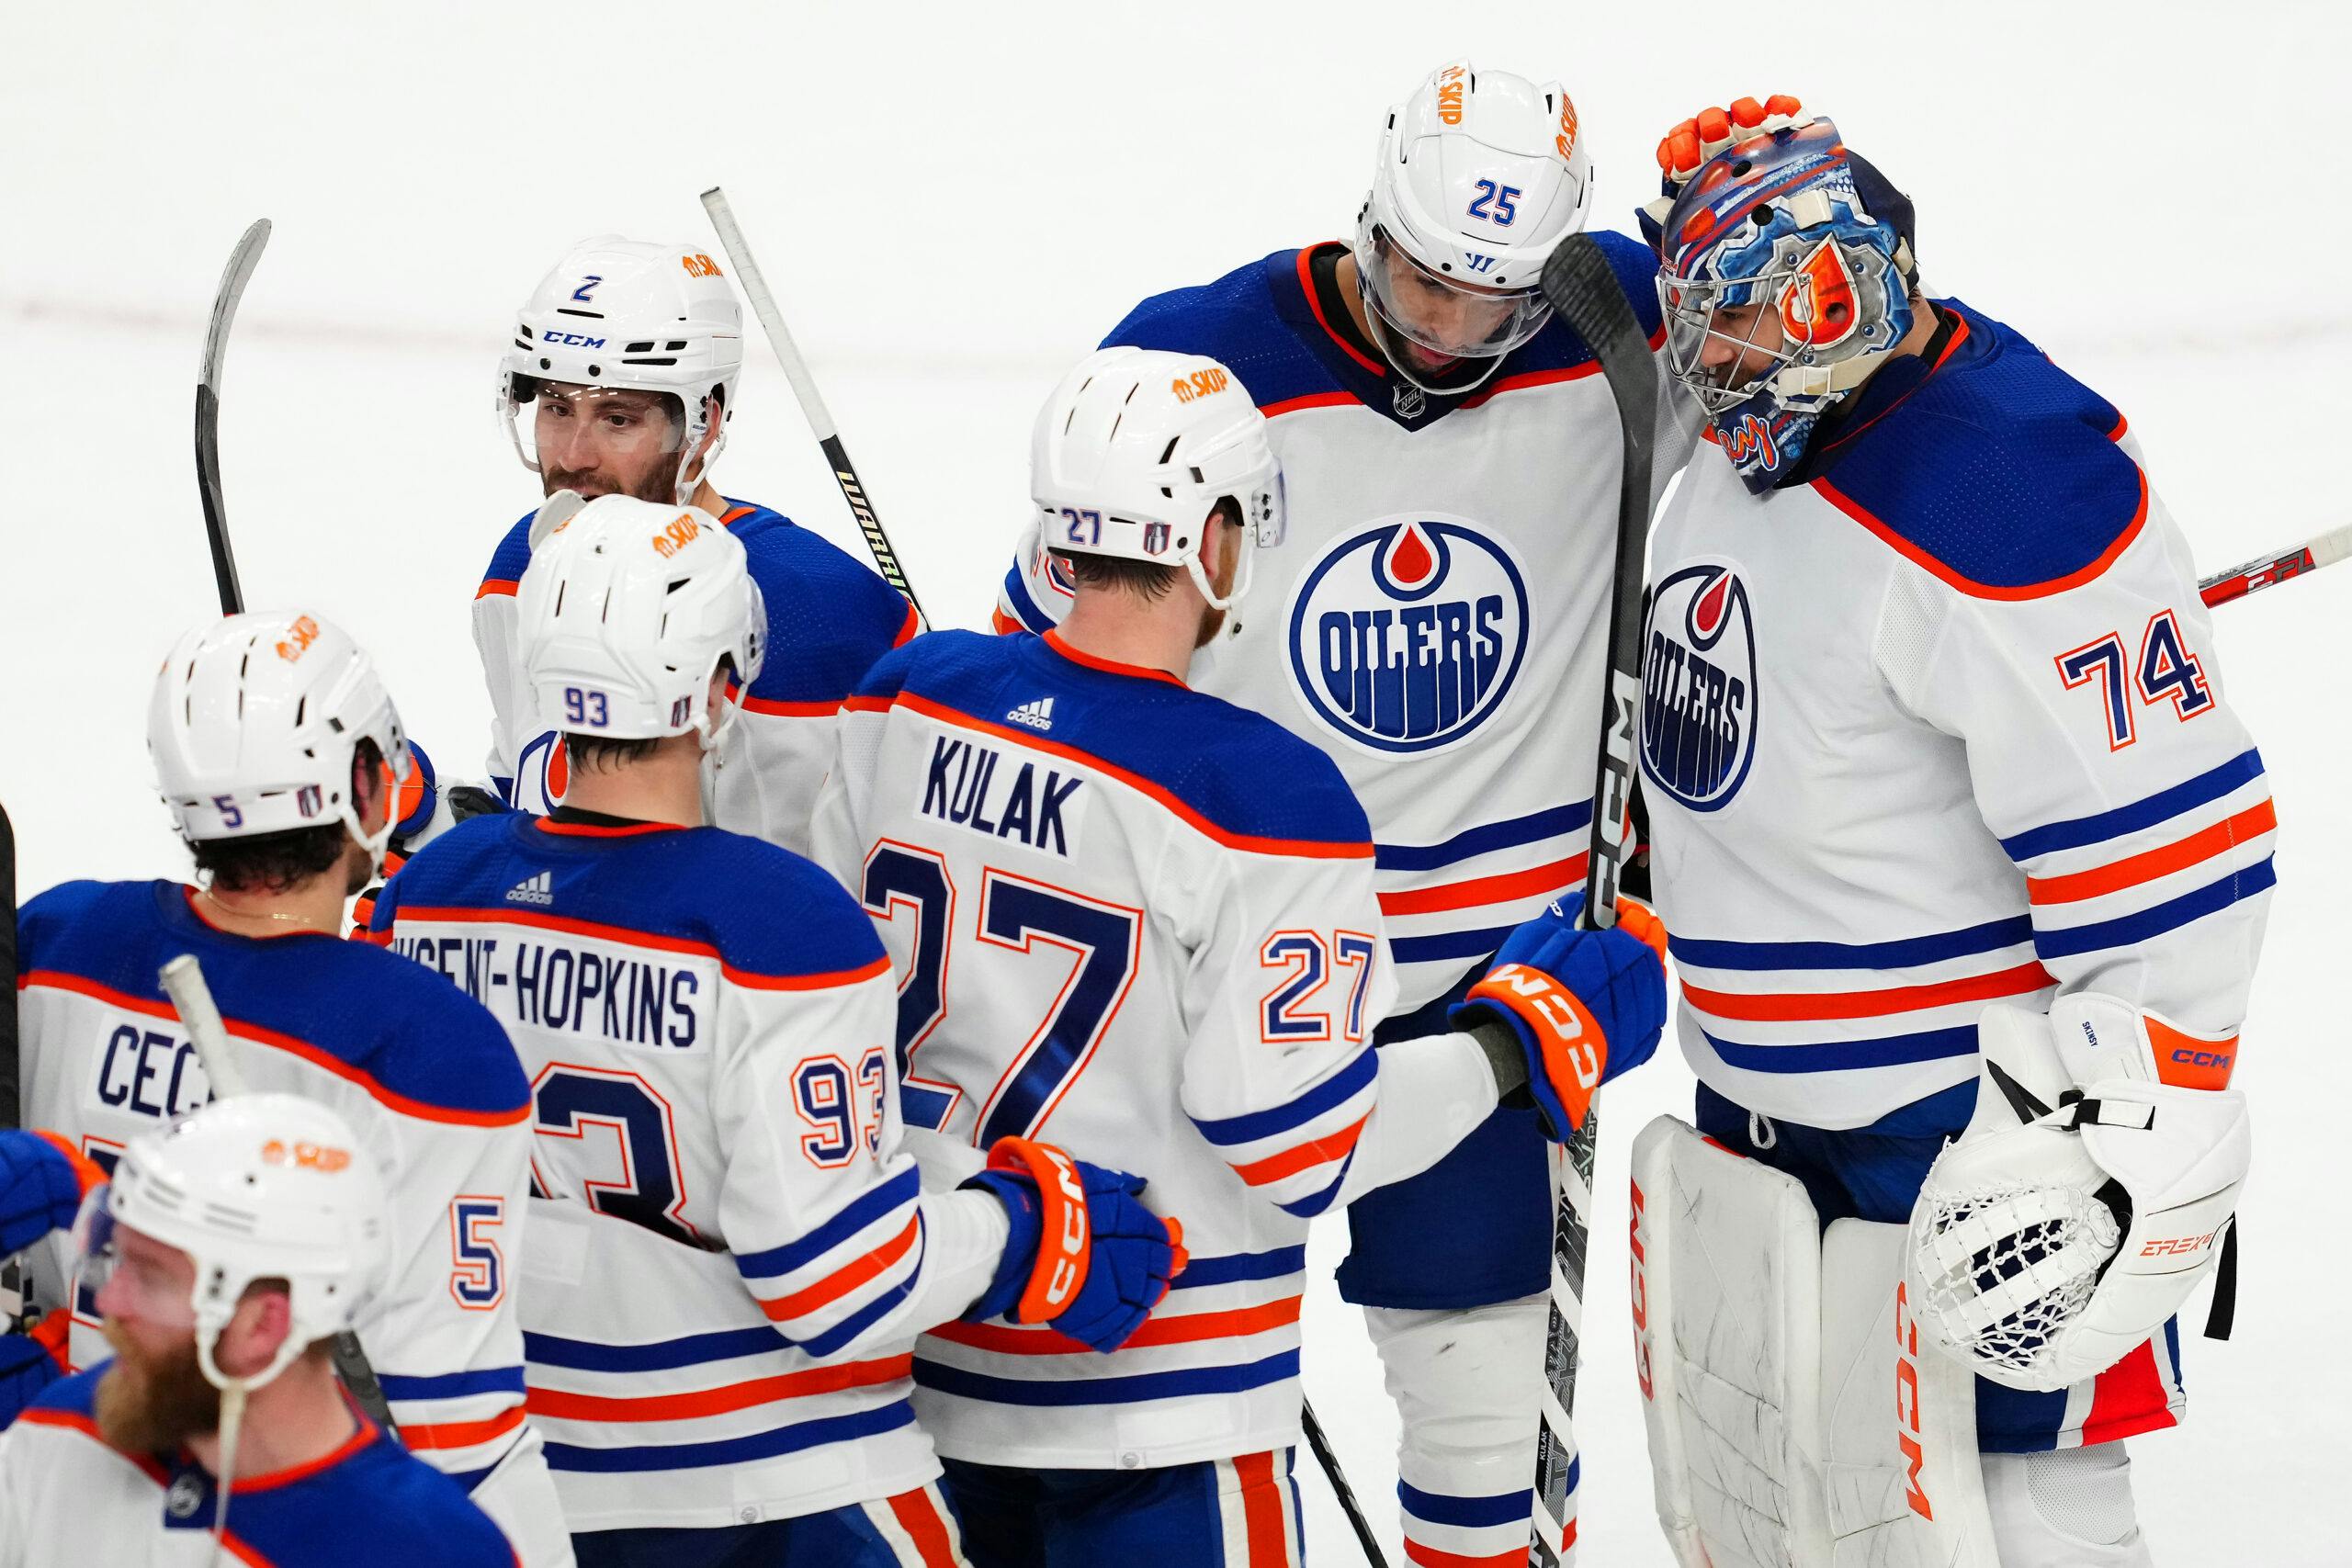 Edmonton Oilers - I'm extremely proud that the Oilers are